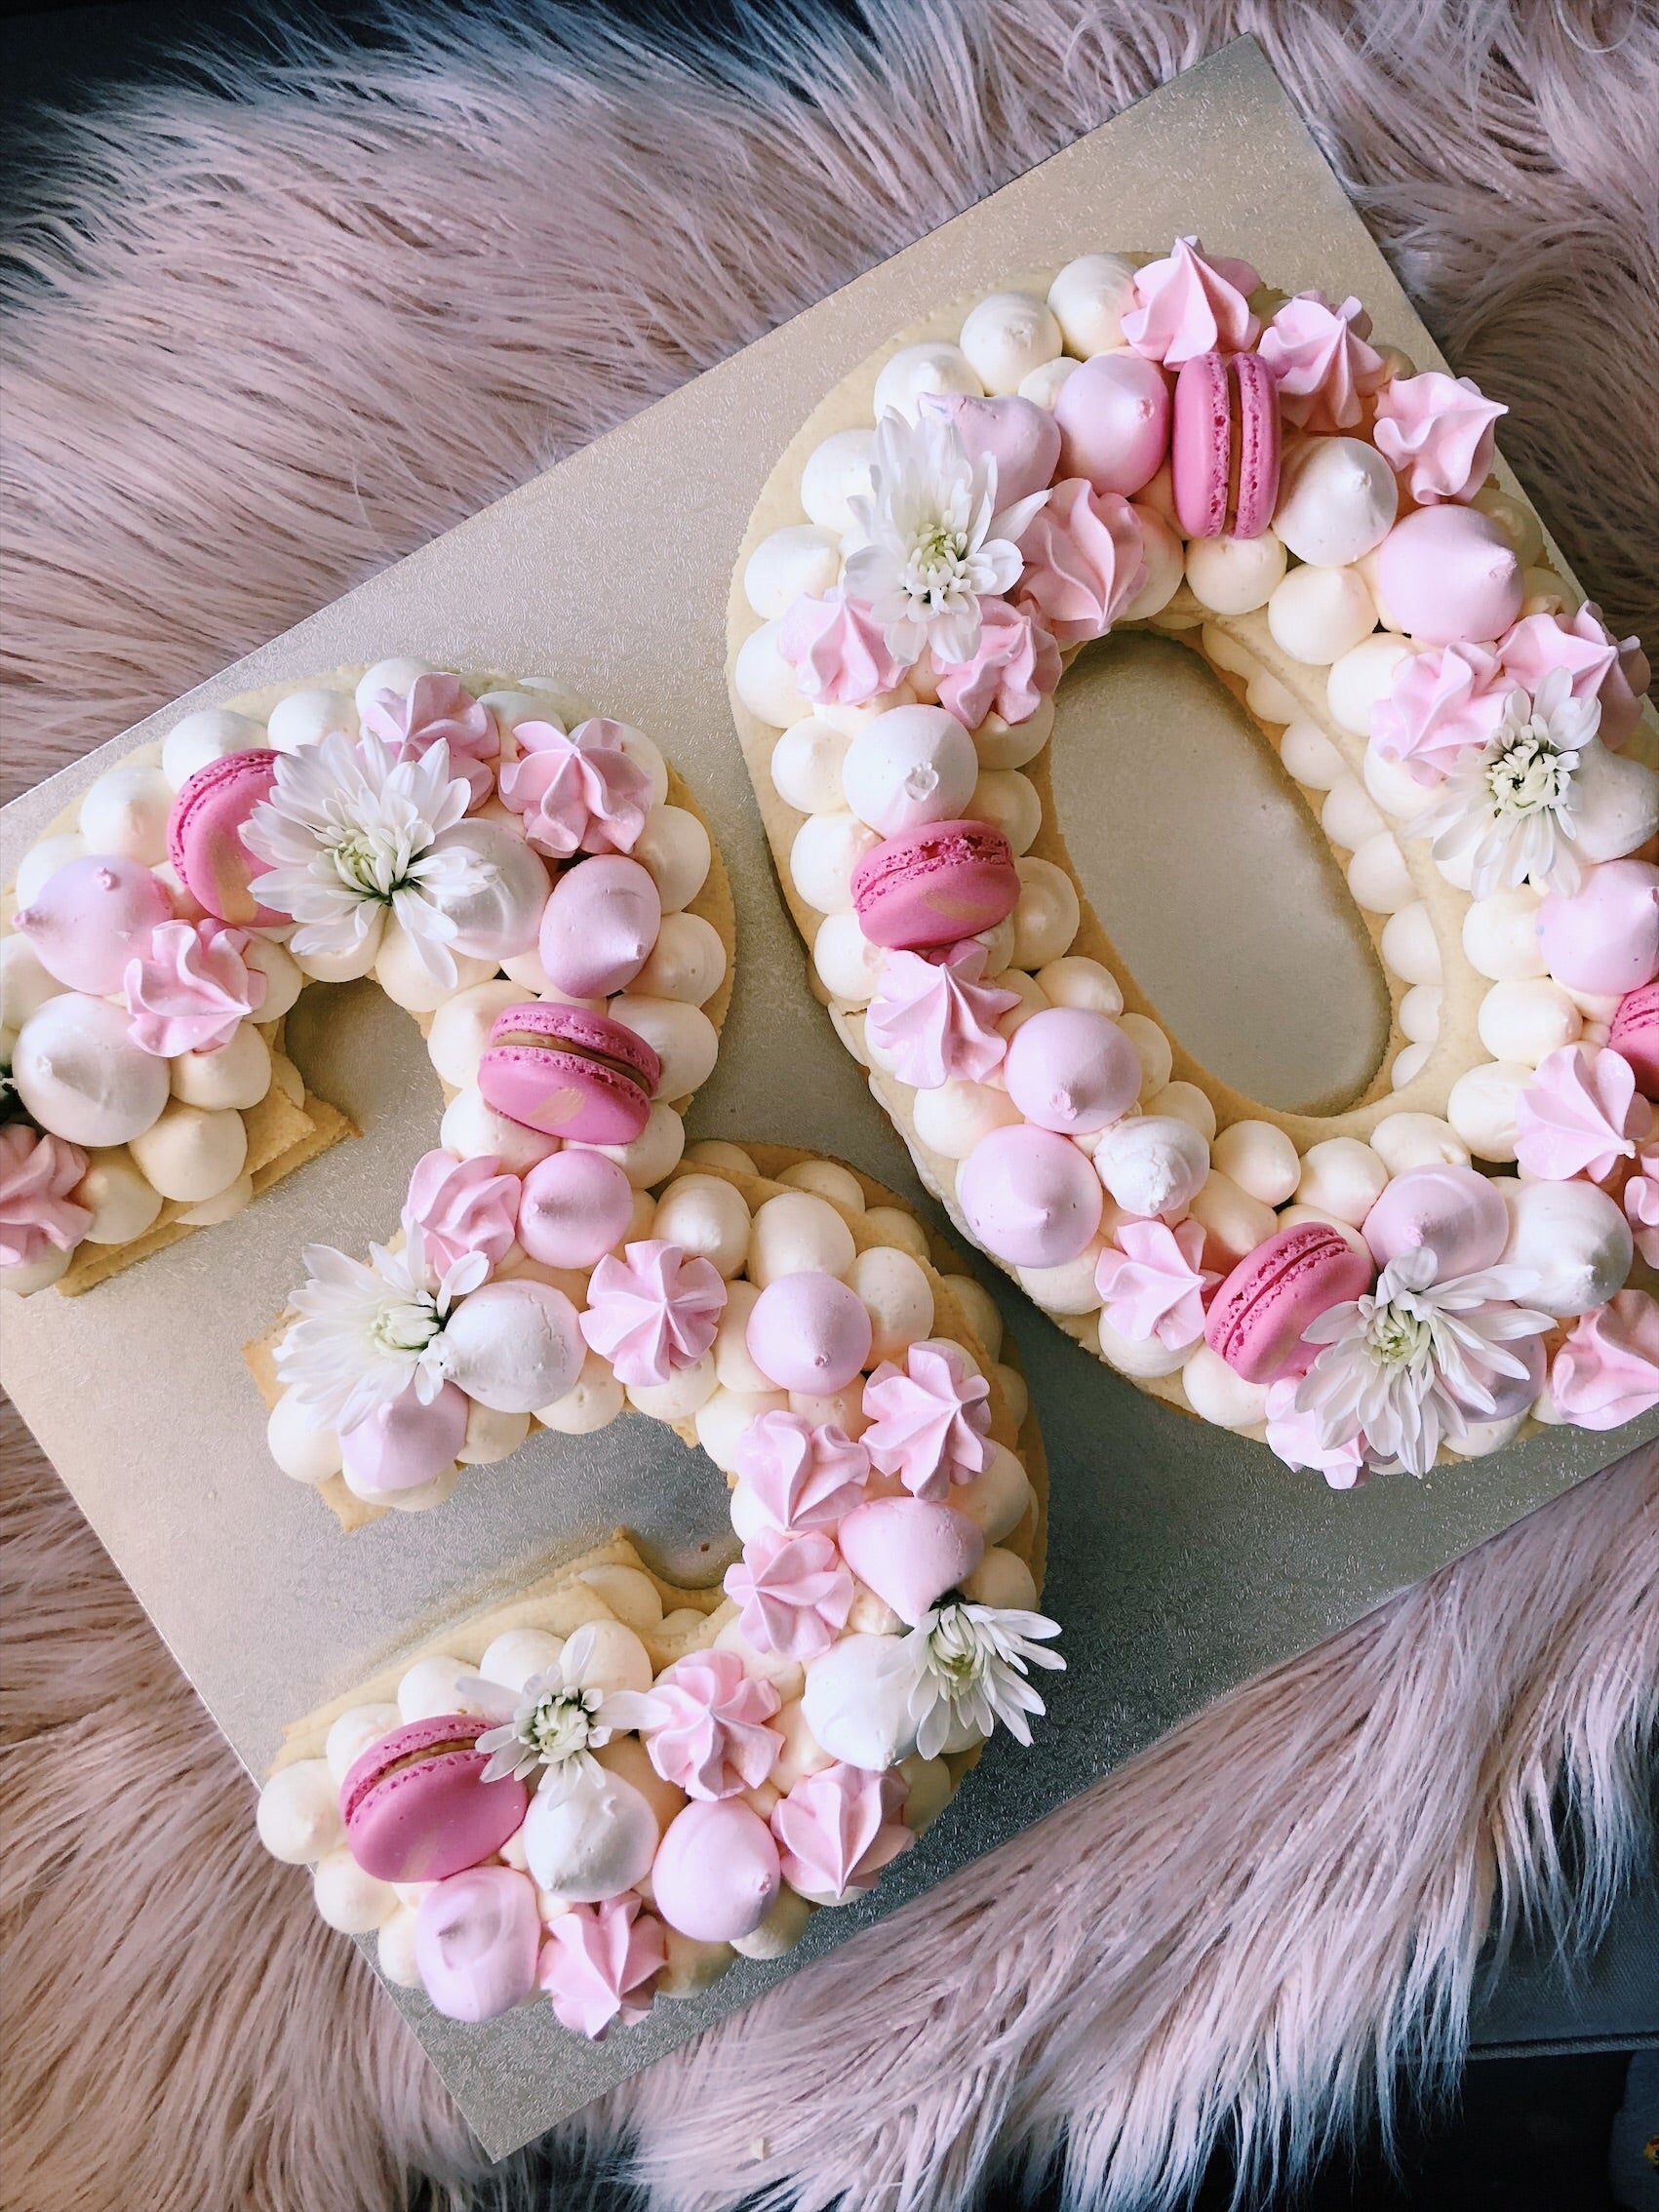 Easy Step-By-Step on How to Make A Letter Cake